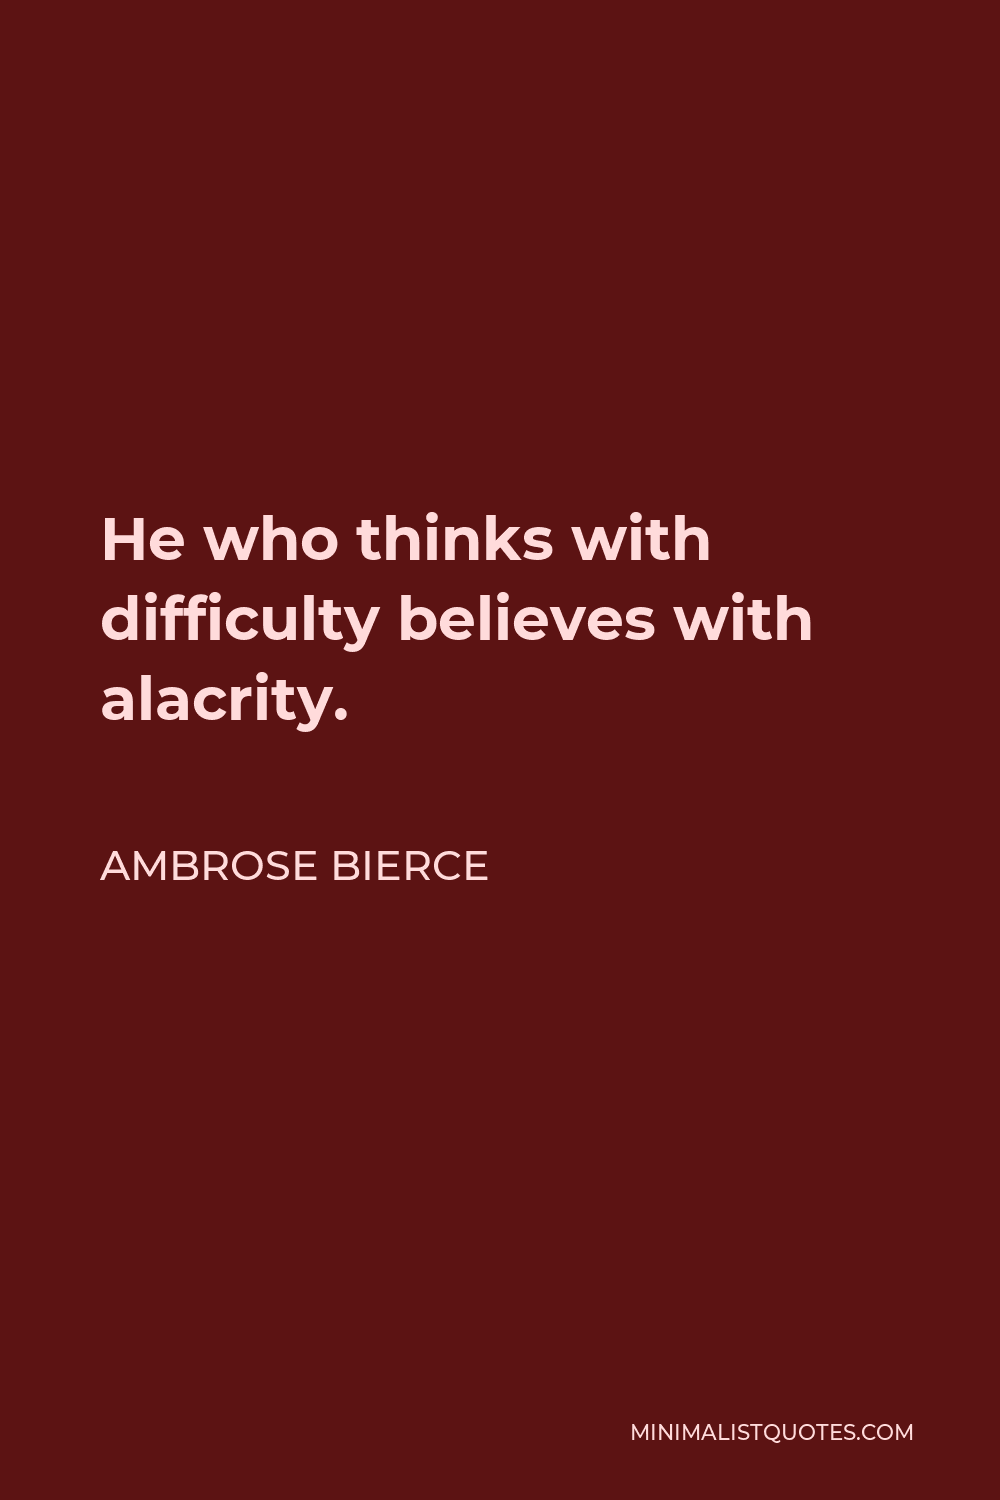 Ambrose Bierce Quote: He who thinks with difficulty believes with alacrity.